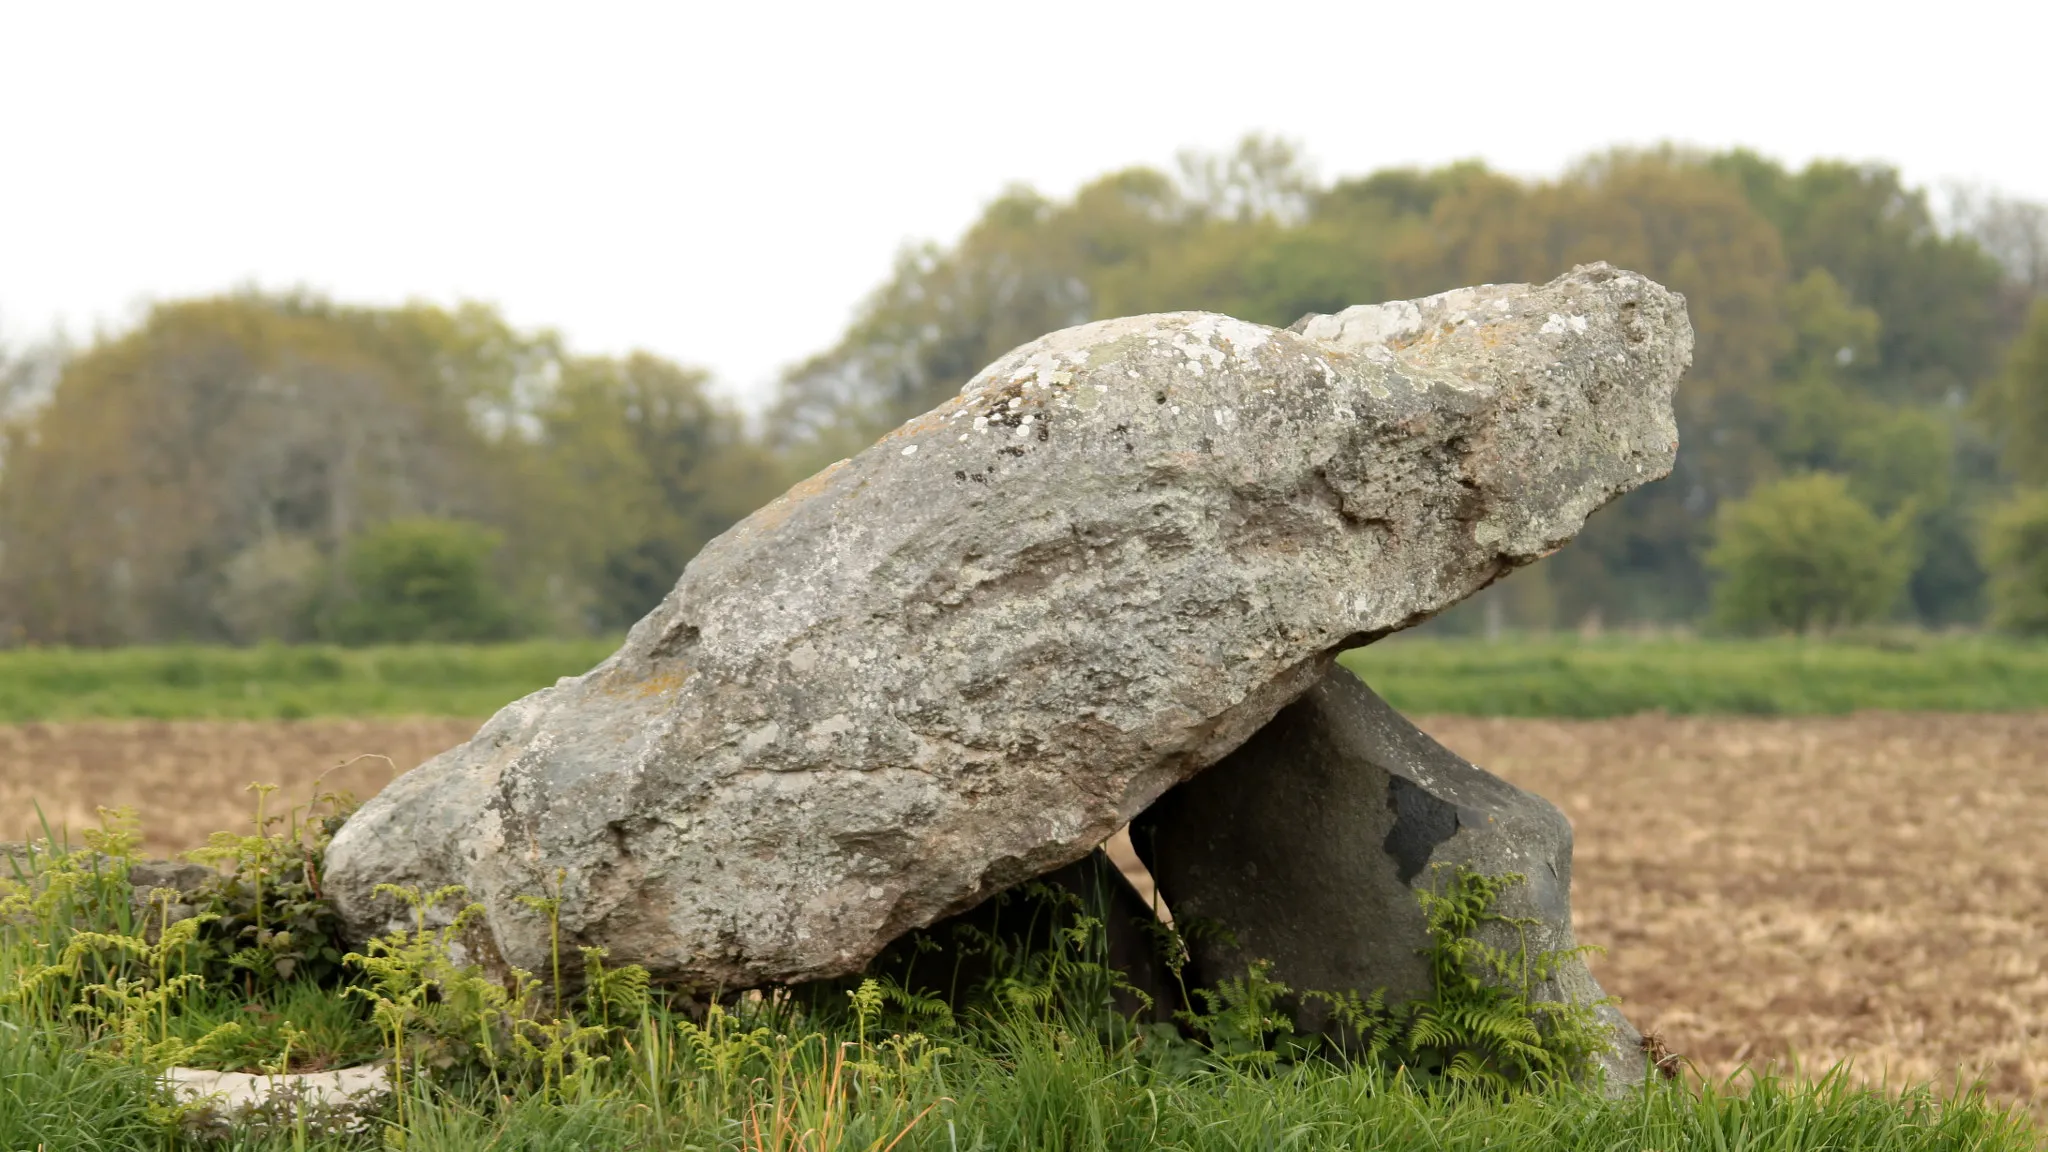 Photo showing: 500px provided description: A dolmen, also known as a portal tomb, portal grave or quoit, is a type of single-chamber megalithic tomb, usually consisting of two or more upright stones supporting a large flat horizontal capstone (table), although there are also more complex variants. Most date from the early Neolithic period (4000 to 3000 BC). Dolmens were typically covered with earth or smaller stones to form a barrow. In many instances, that covering has weathered away, leaving only the stone "skeleton" of the burial mound intact.

[source Wikipedia] [#dolmen ,#Canon EOS 500D ,#Brittany ,#OliBac ,#MMxIV]